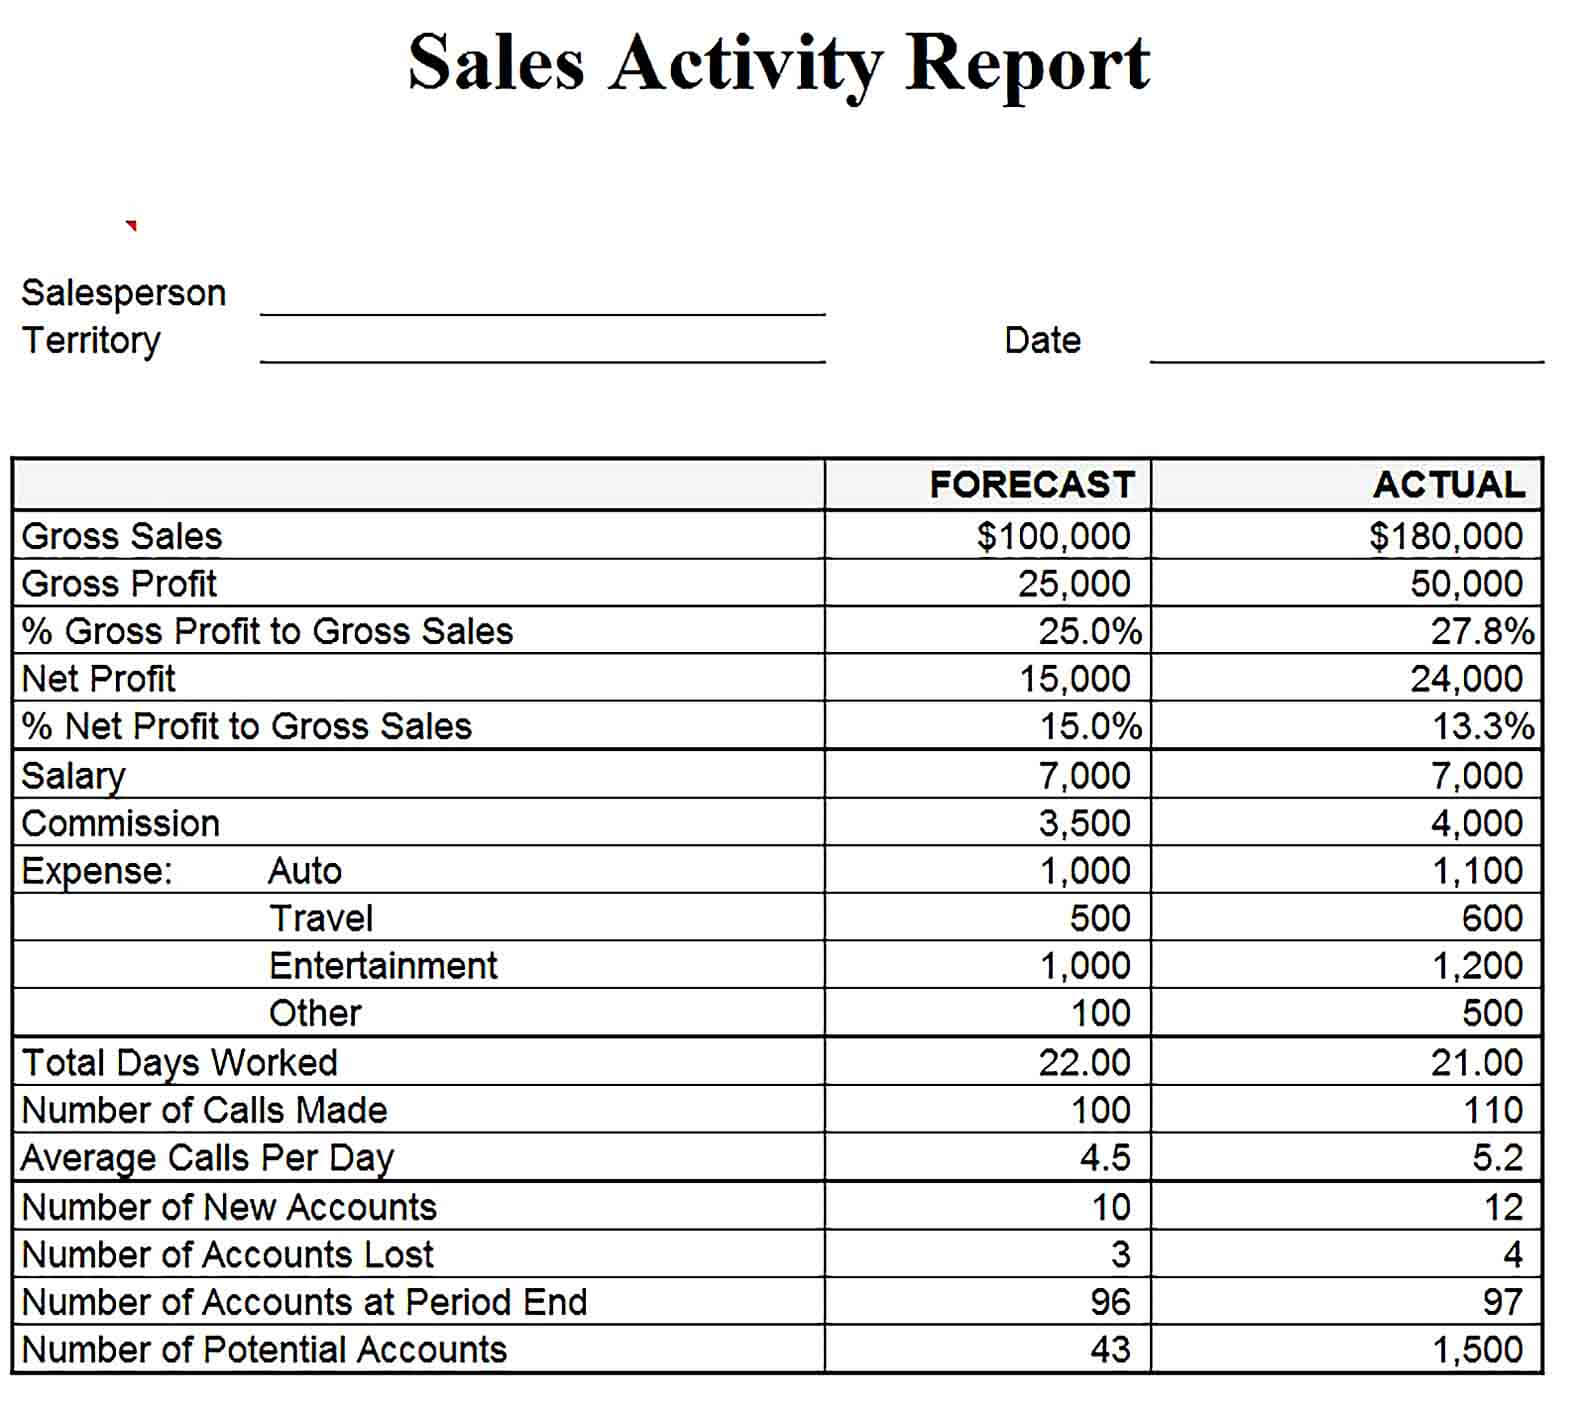 Sample Sales Activity Report Excel Template